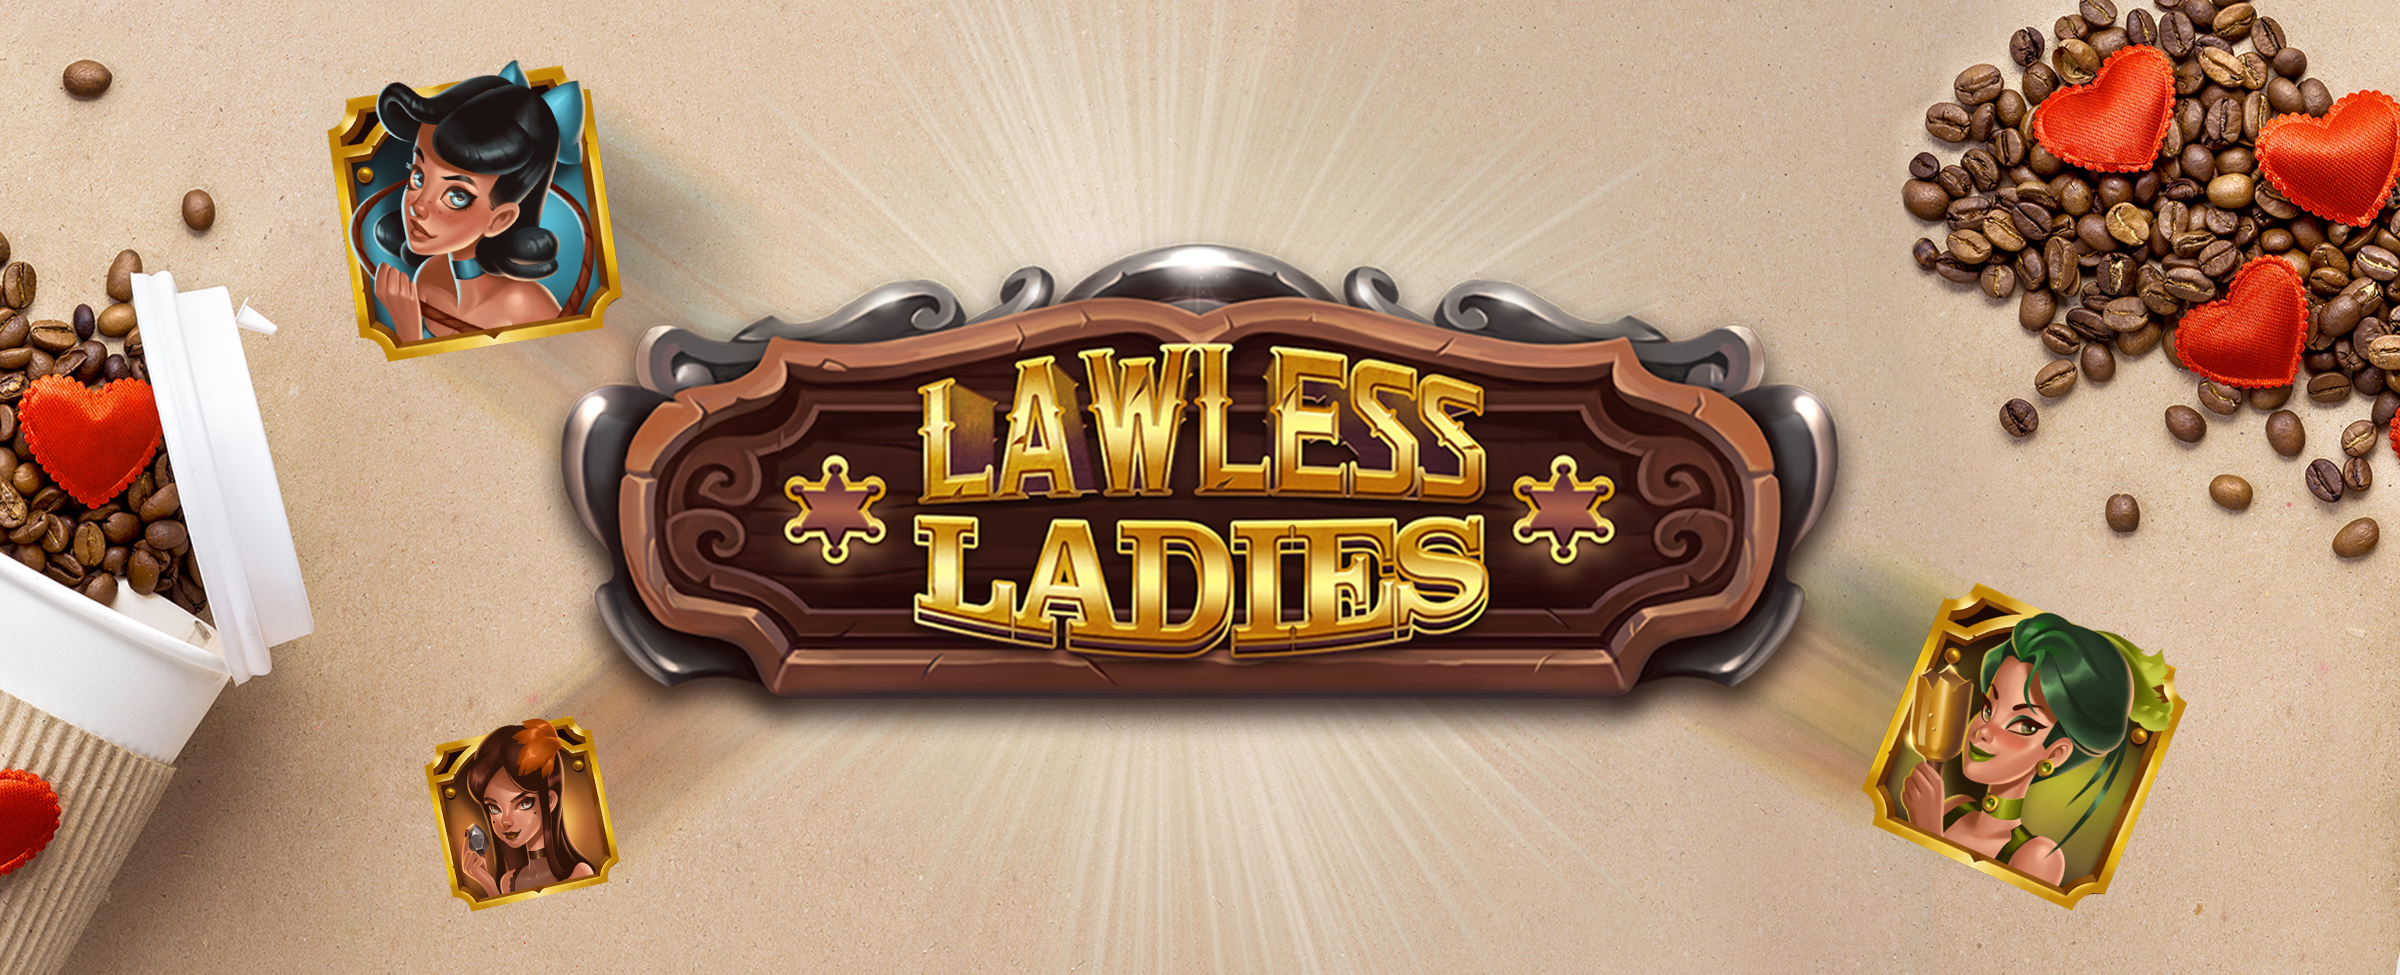 On top of a beige bench surface, we see the Lawless Ladies slot game from Cafe Casino hovering above. To the left is a white reusable coffee cup with its lid open and coffee beans spilling out, accompanied by red-covered heart-shaped chocolates, as is the case on the opposite side of the image.